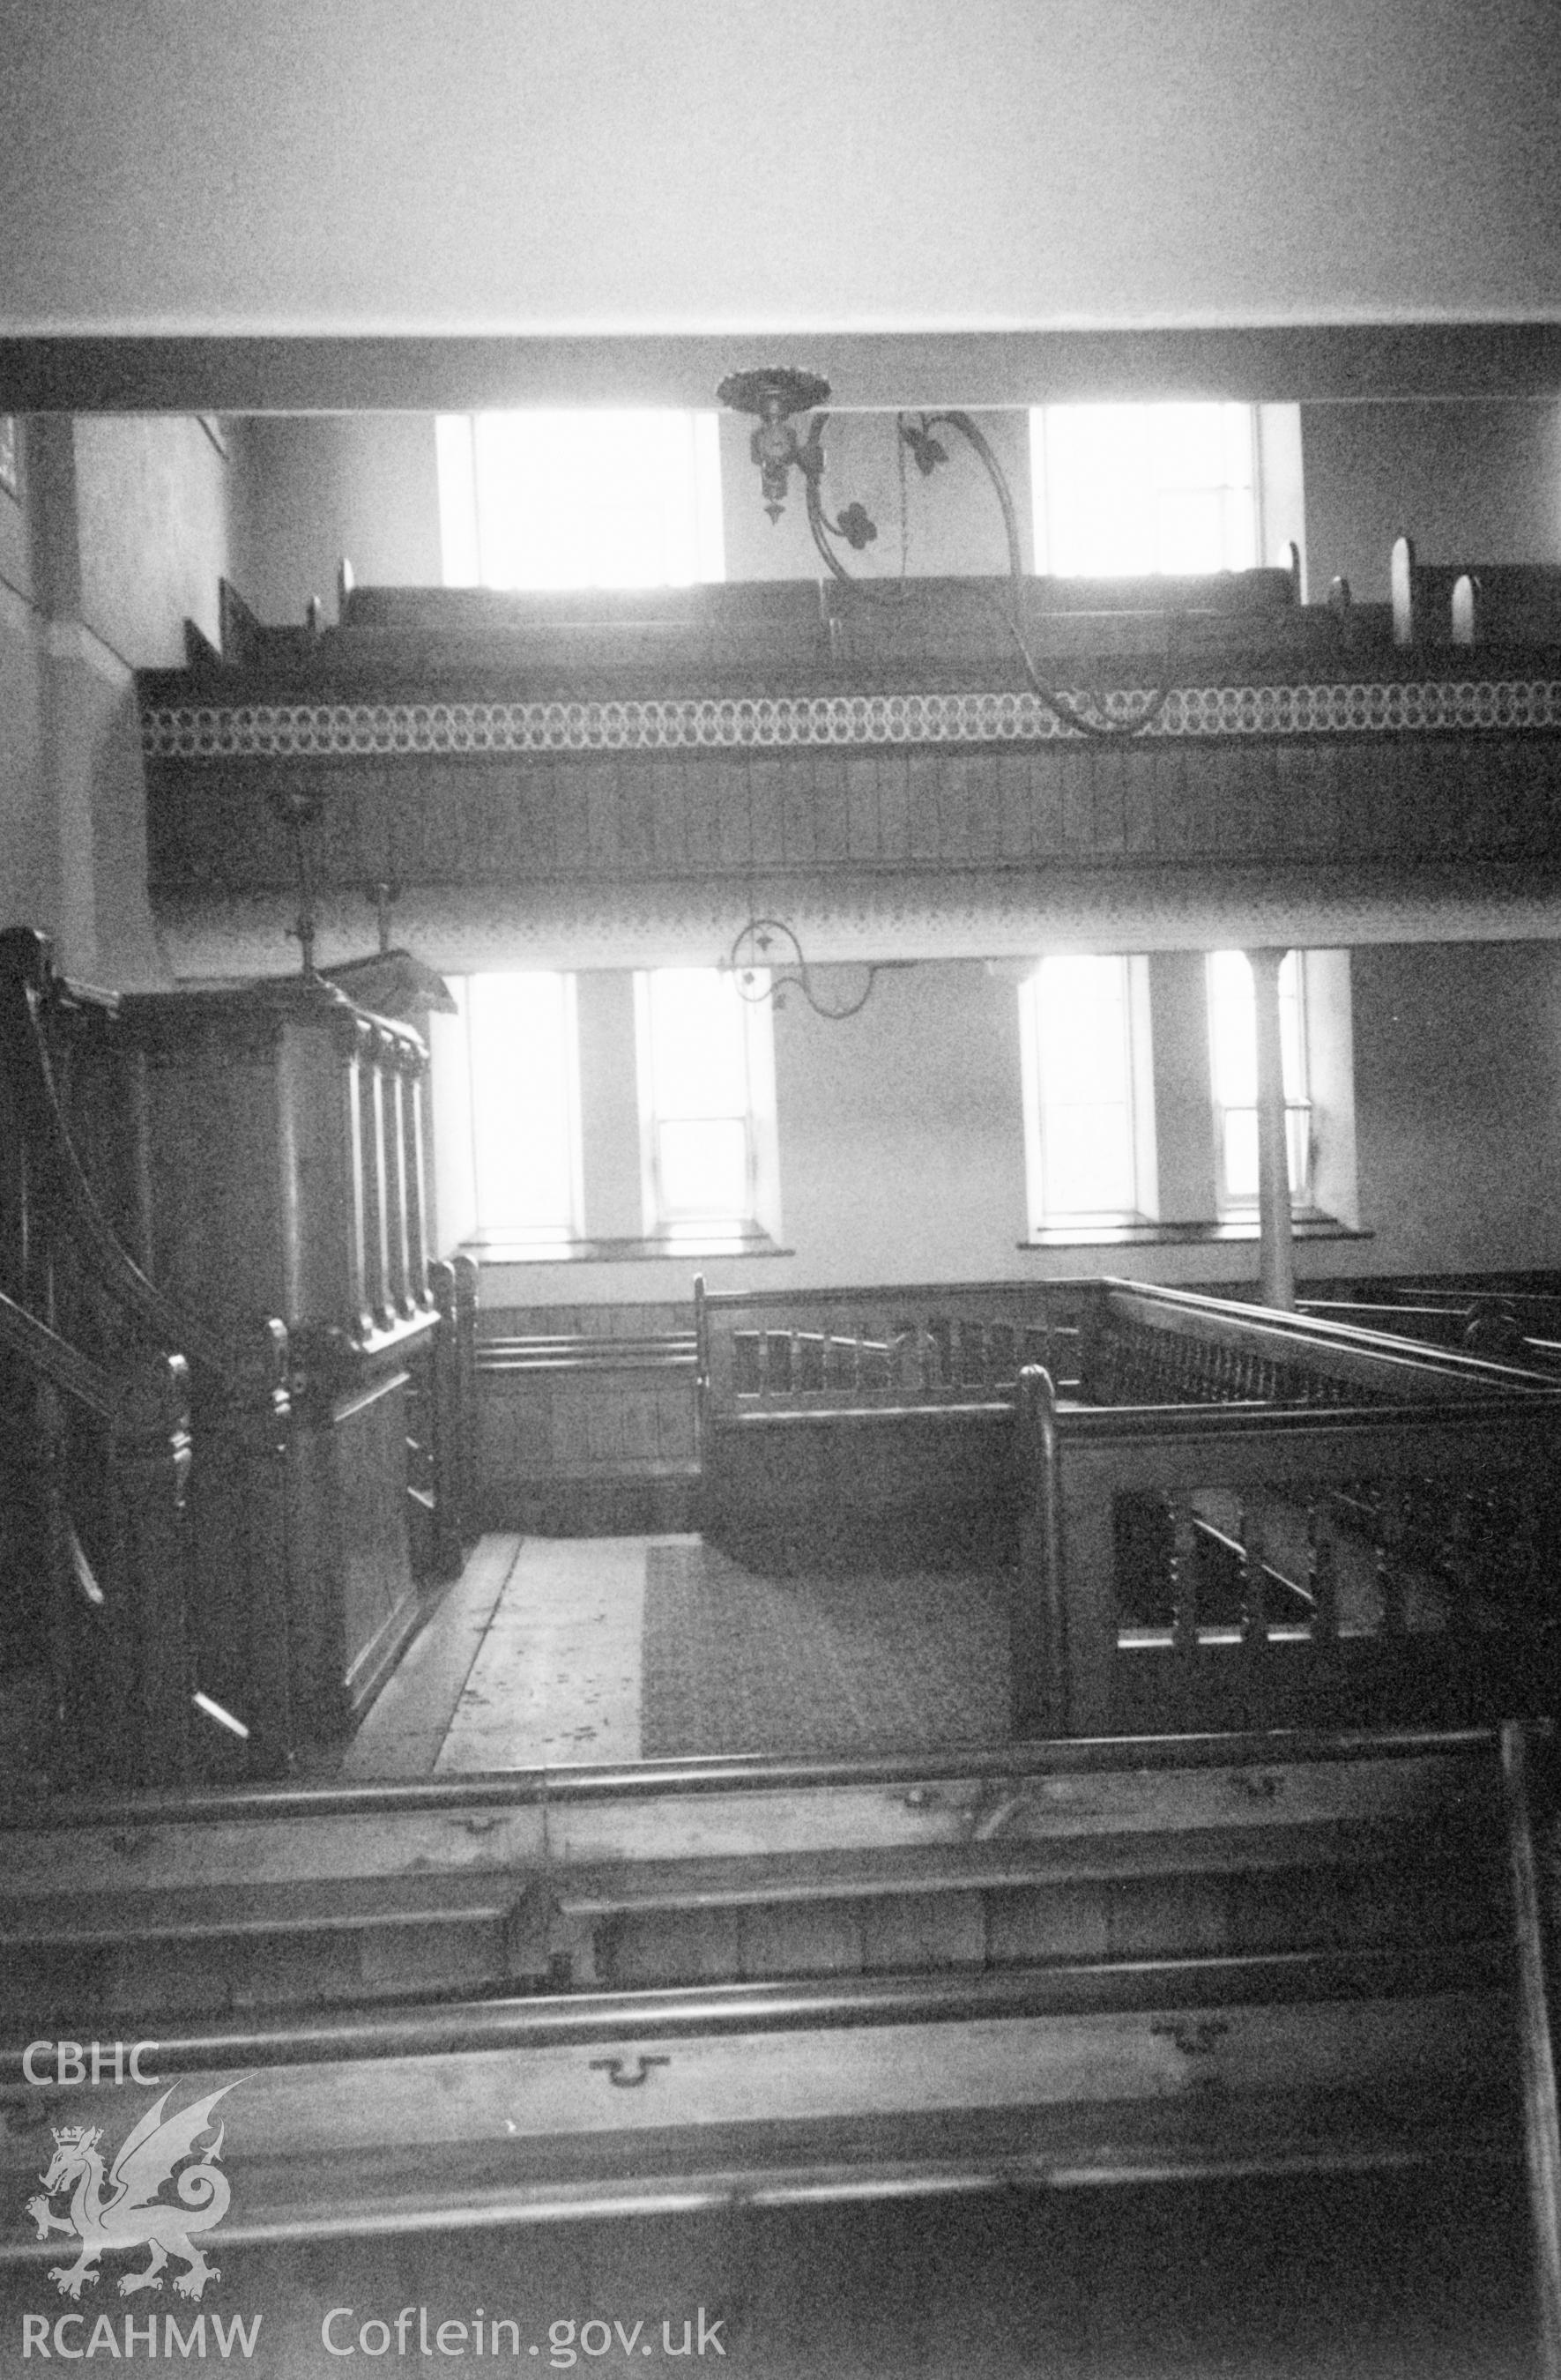 Digital copy of a black and white photograph showing an interior view of Ebeneser Welsh Independent Chapel, Llansadwrn, taken by Robert Scourfield, 1996.